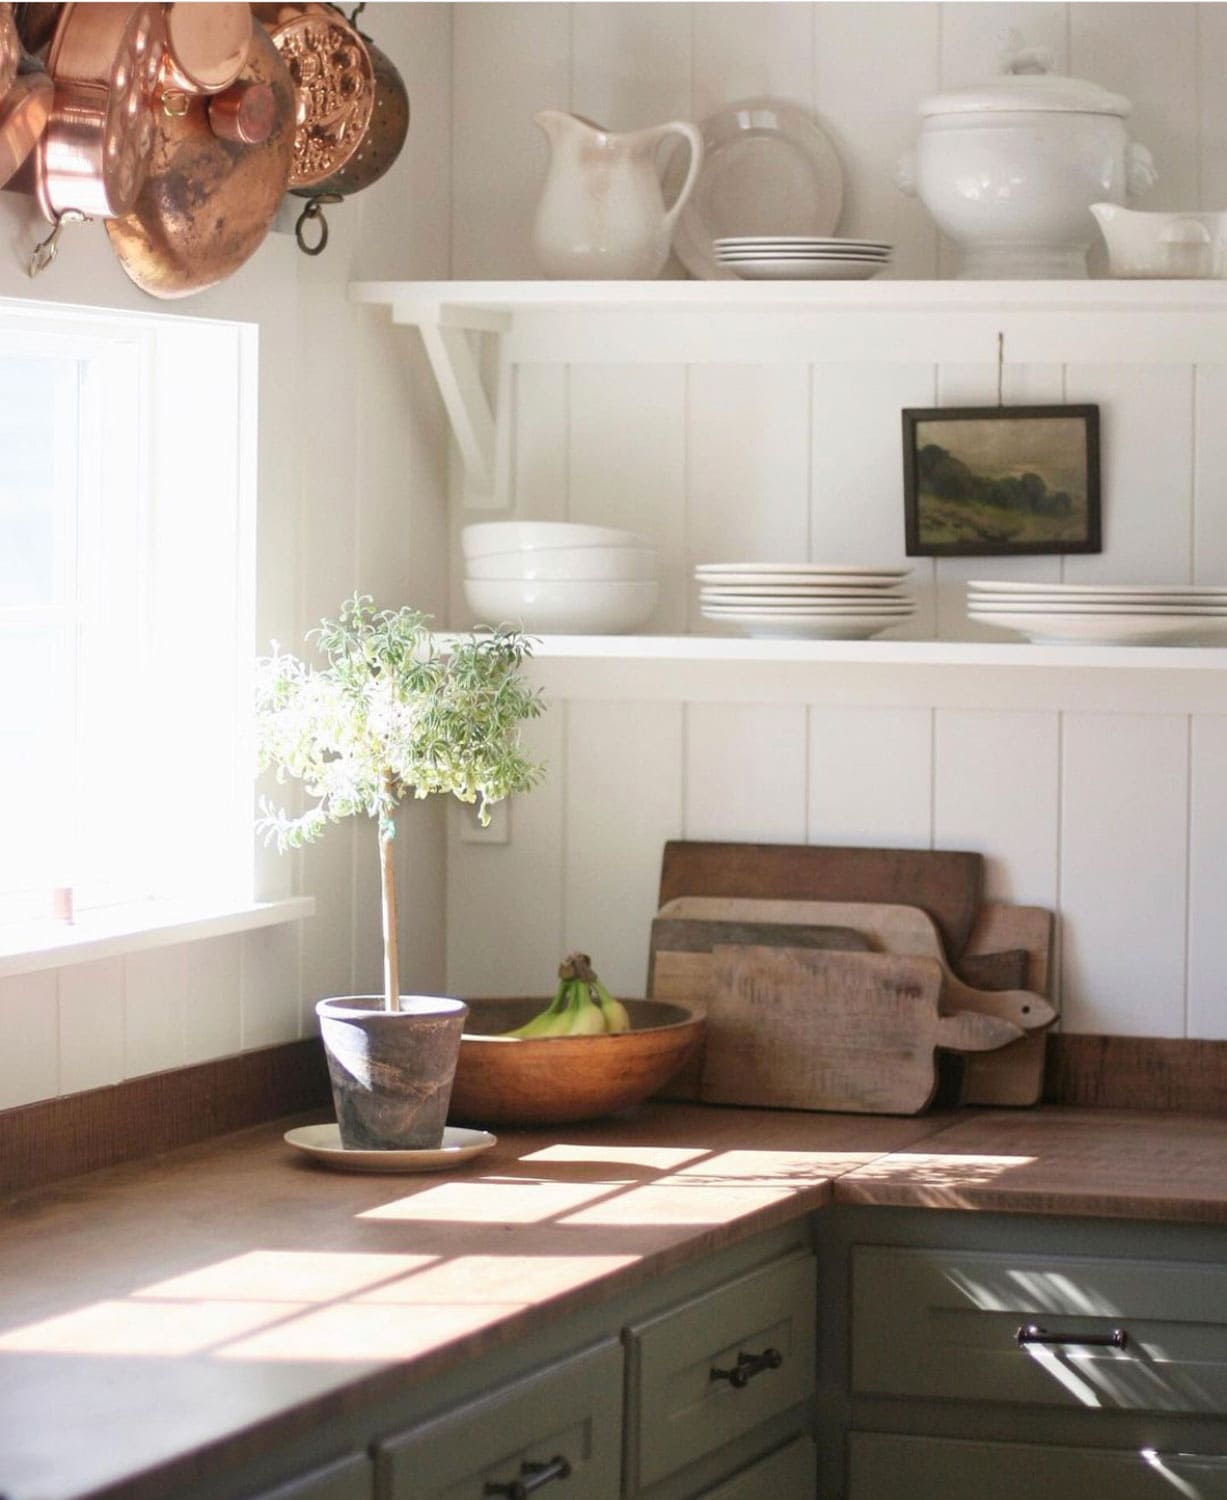 Megan Miller's kitchen with open shelving, copper pots, topiary and art